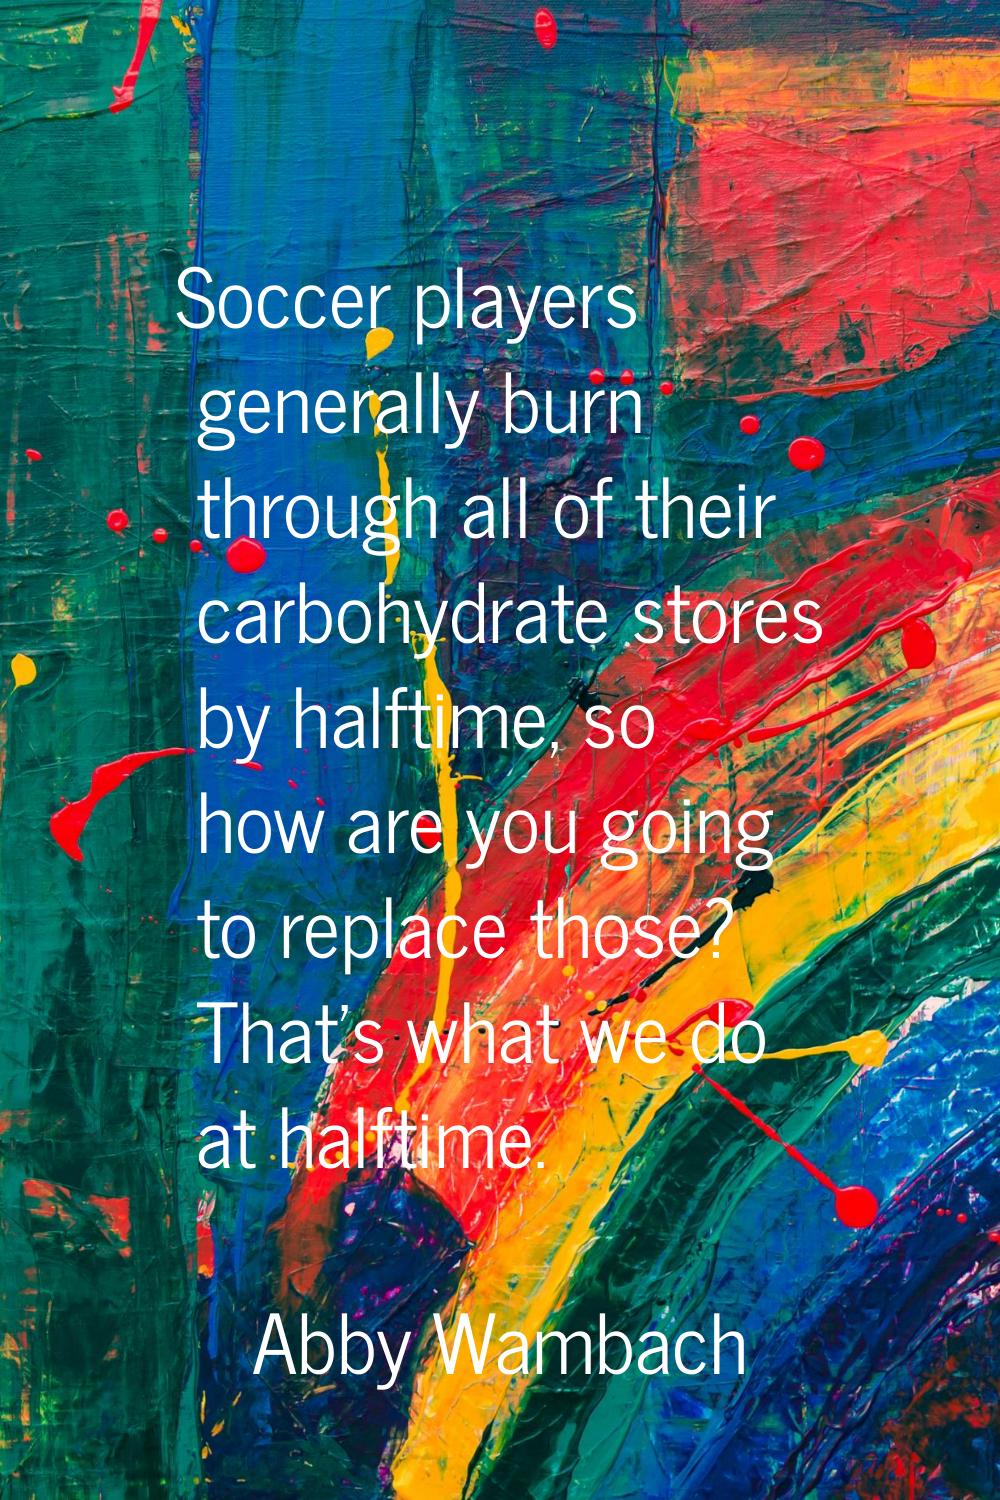 Soccer players generally burn through all of their carbohydrate stores by halftime, so how are you 